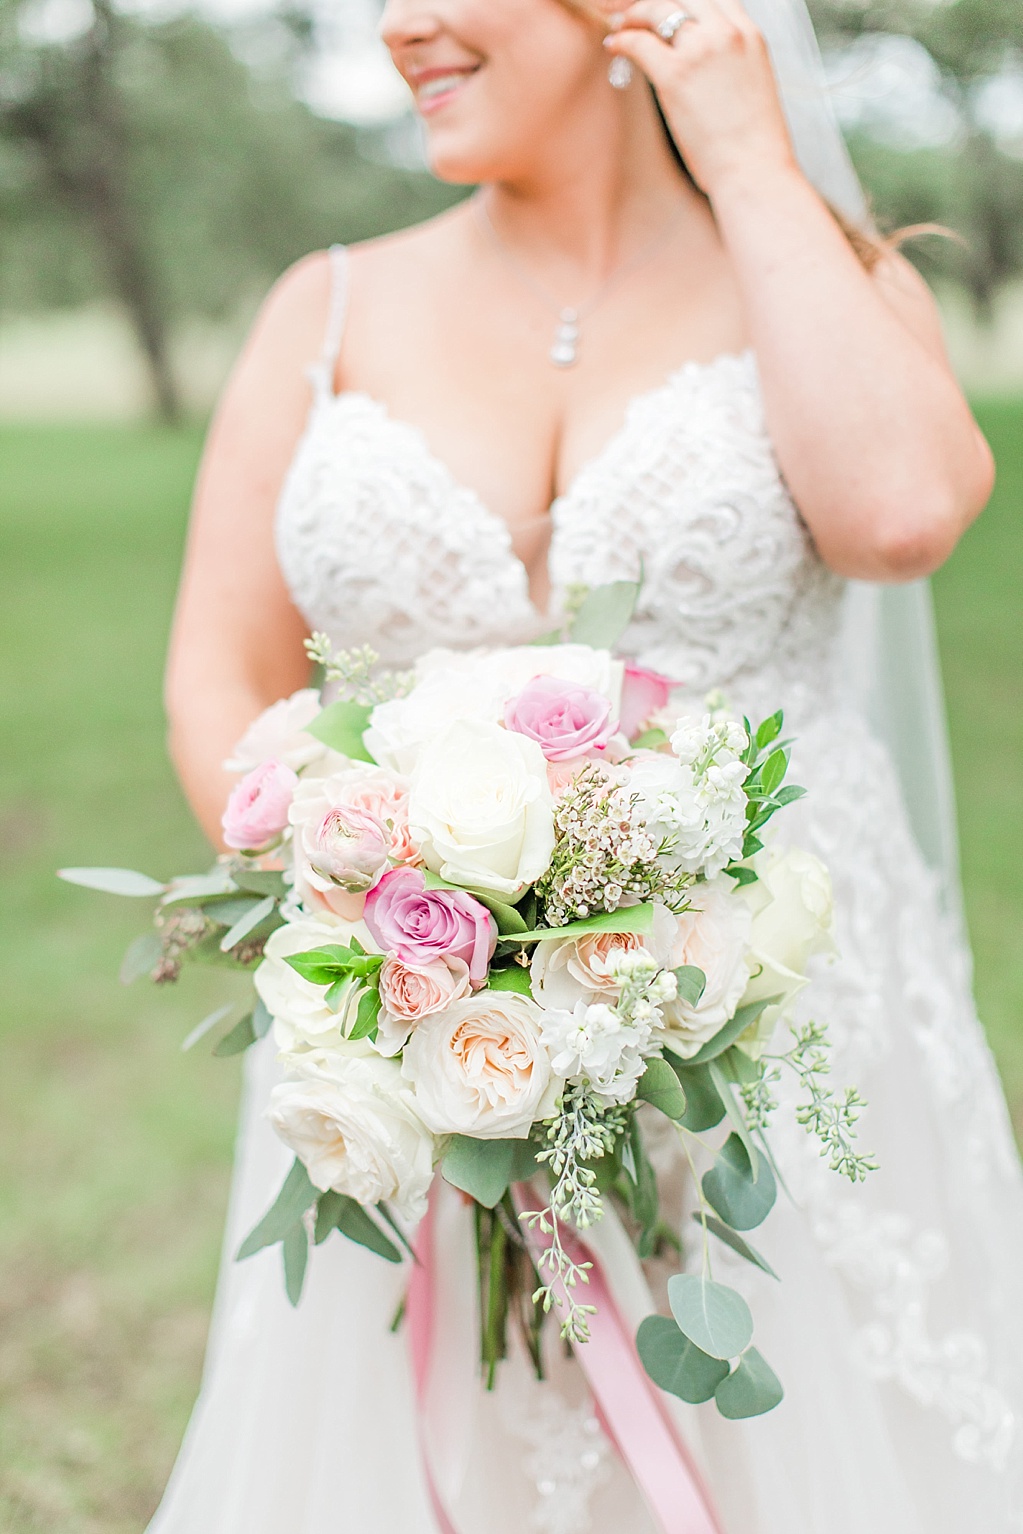 The Oaks at Boerne Wedding Photos by Allison Jeffers Photography 0109